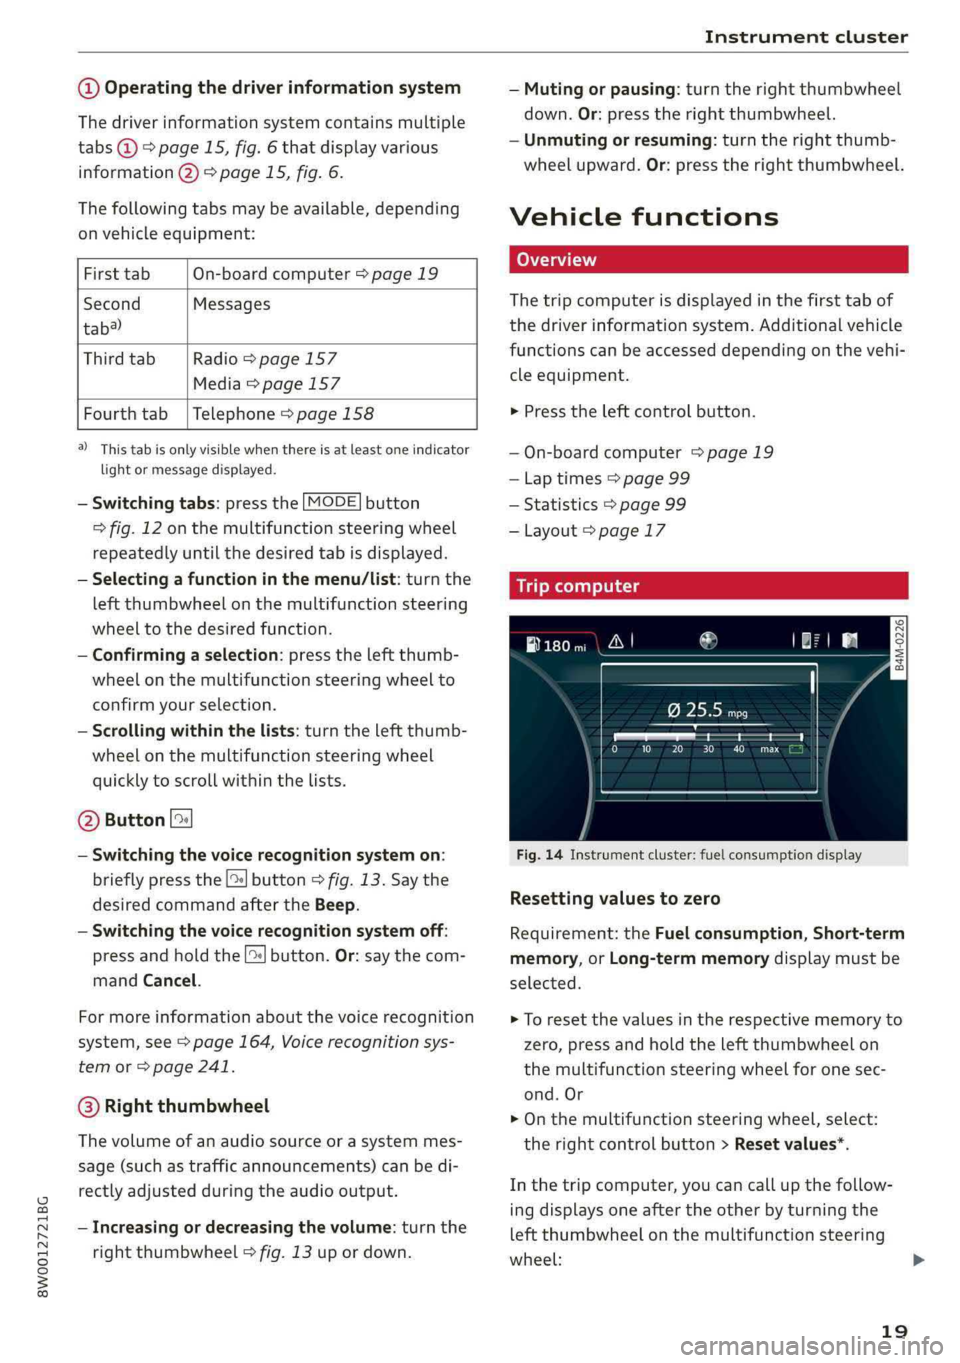 AUDI S4 2019  Owners Manual 8W0012721BG
Instrumentcluster
 
@Operatingthedriverinformationsystem
Thedriverinformationsystemcontainsmultiple
tabs@>page15,fig.6thatdisplayvarious
information@)>page15,fig.6.
Thefollowingtabsmaybeav